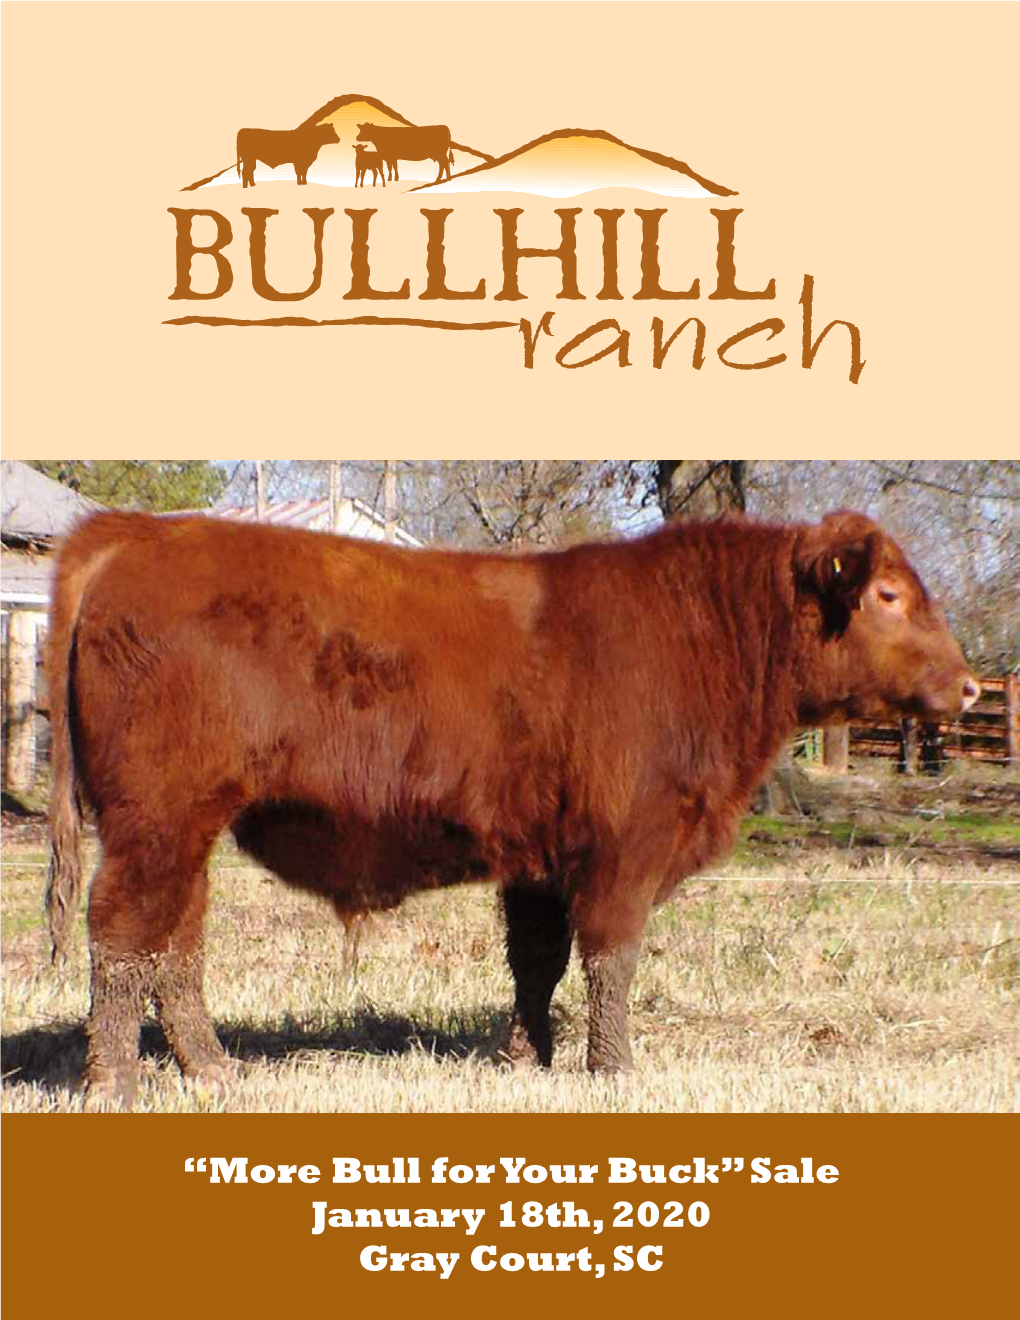 Bull for Your Buck” Sale January 18Th, 2020 Gray Court, SC Jim and Alvina Near the Beginning of Their Red Angus Journey